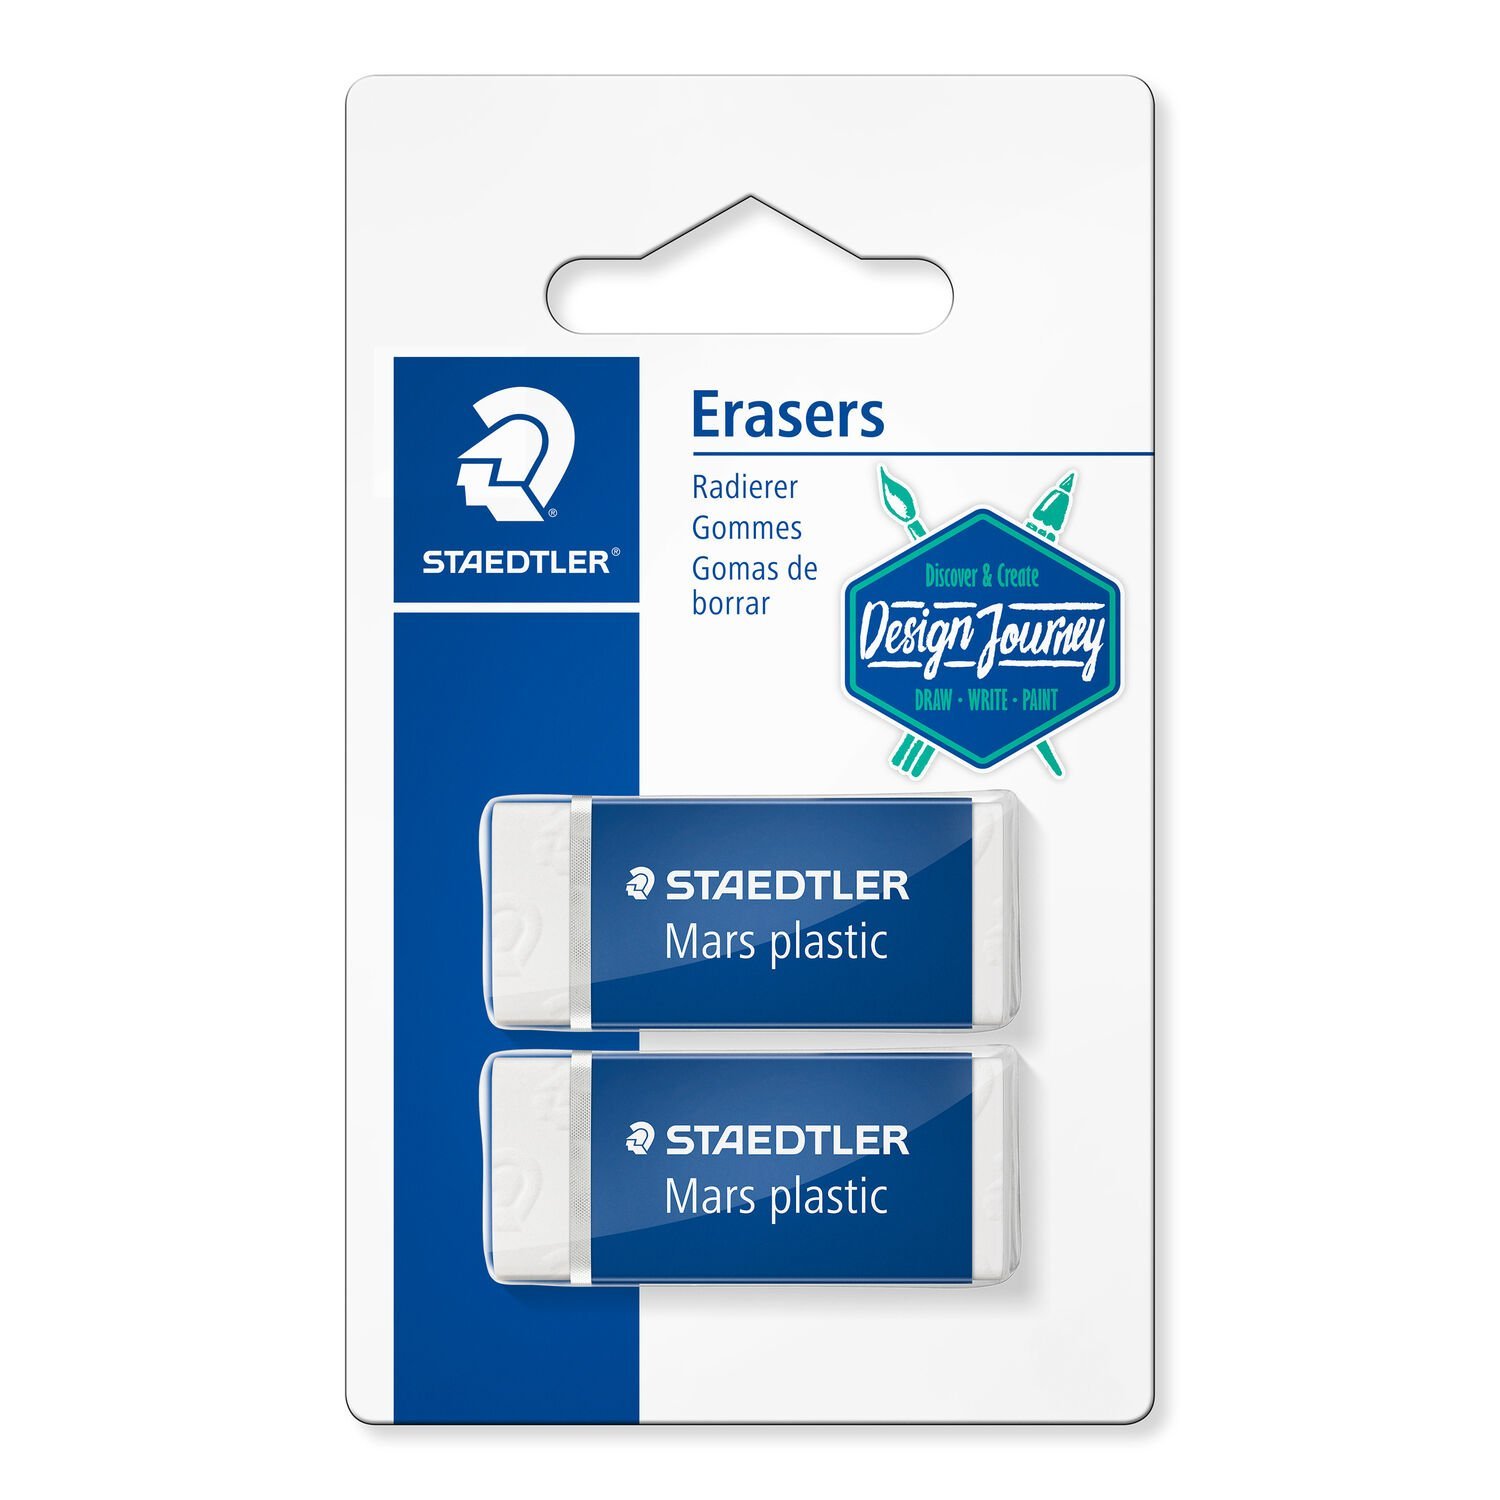 Blistercard containing 2 erasers 526 53